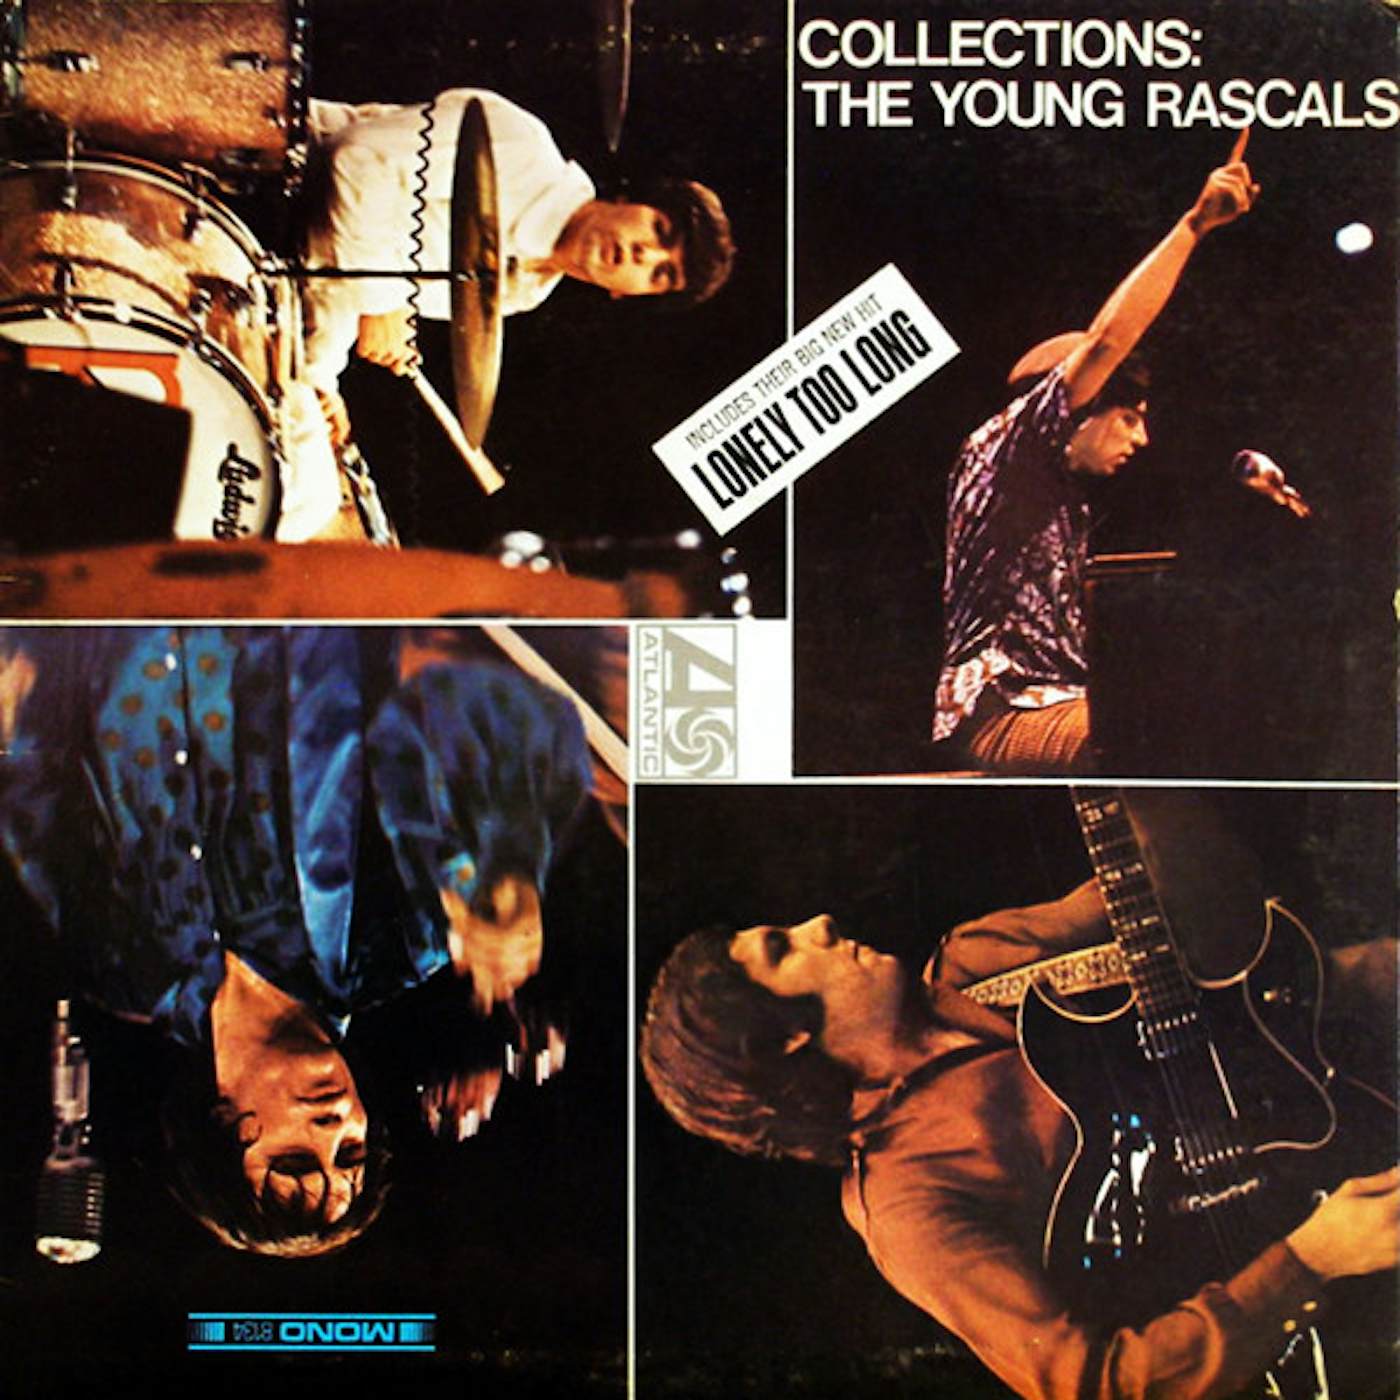 The Young Rascals COLLECTIONS Vinyl Record